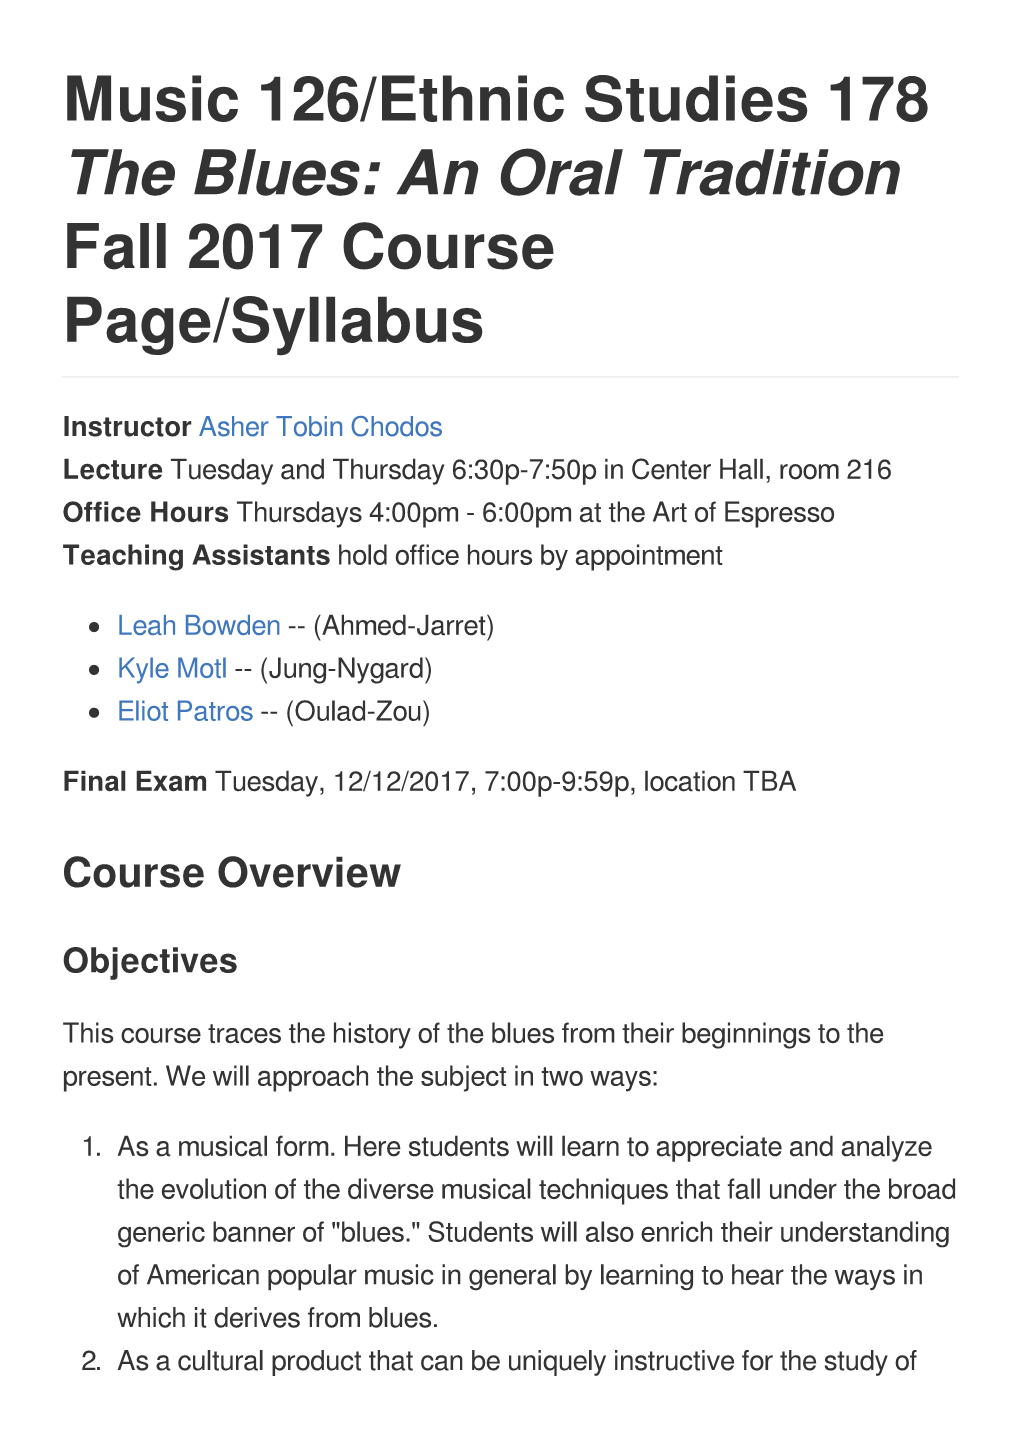 Music 126/Ethnic Studies 178 the Blues: an Oral Tradition Fall 2017 Course Page/Syllabus